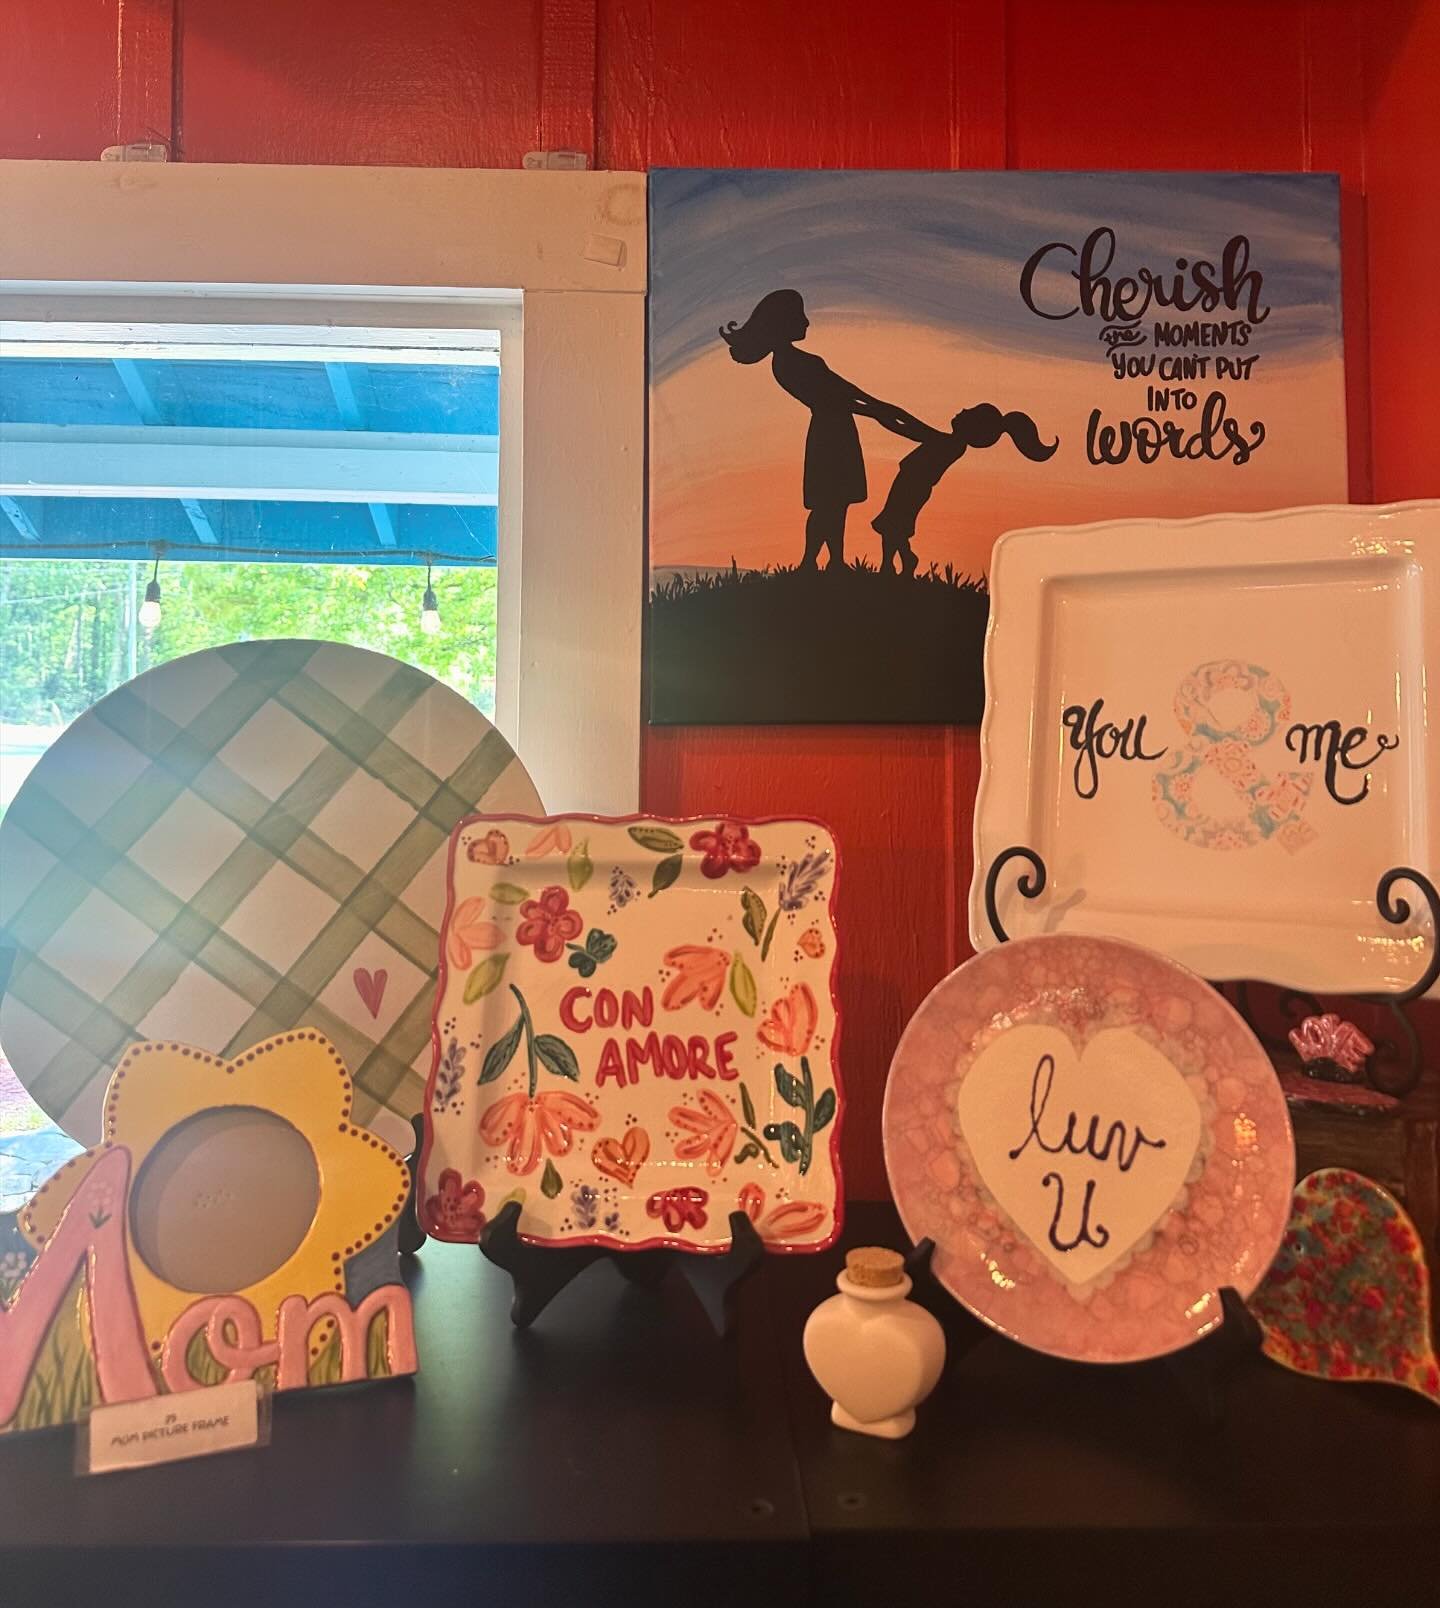 Another reminder to get your Mother&rsquo;s Day pieces done soon!! 

| family friendly art studio in Dawsonville, GA
| pottery,canvas, other arts and crafts 
| open Tue-Sat 12-7
| (706) 265-2738
| 31 Jack Heard Drive, Dawsonville, GA 30534
-
#pottery